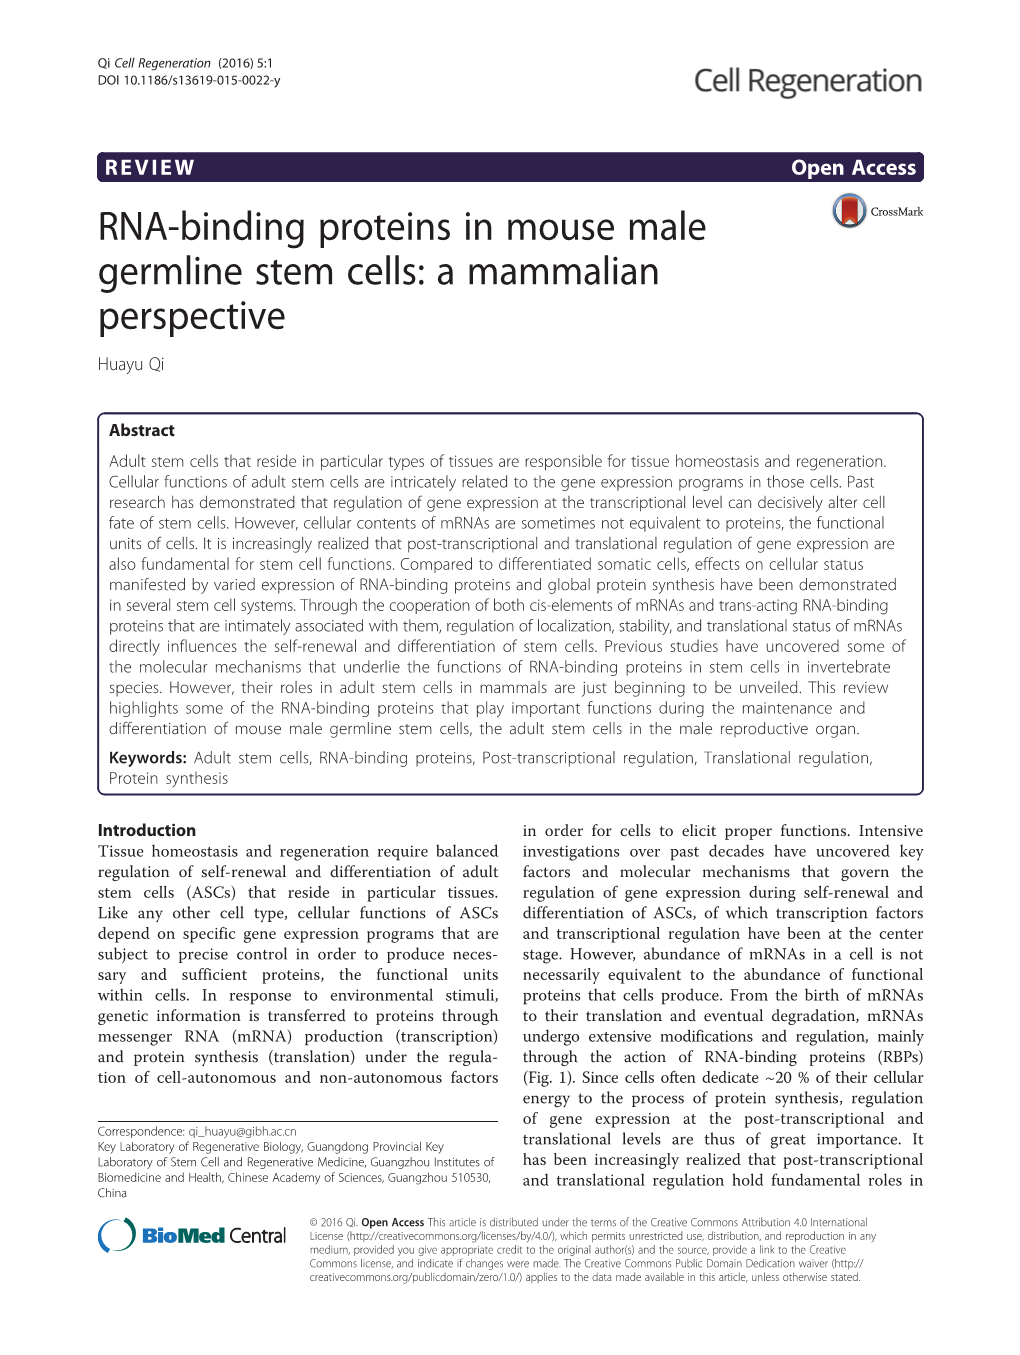 RNA-Binding Proteins in Mouse Male Germline Stem Cells: a Mammalian Perspective Huayu Qi